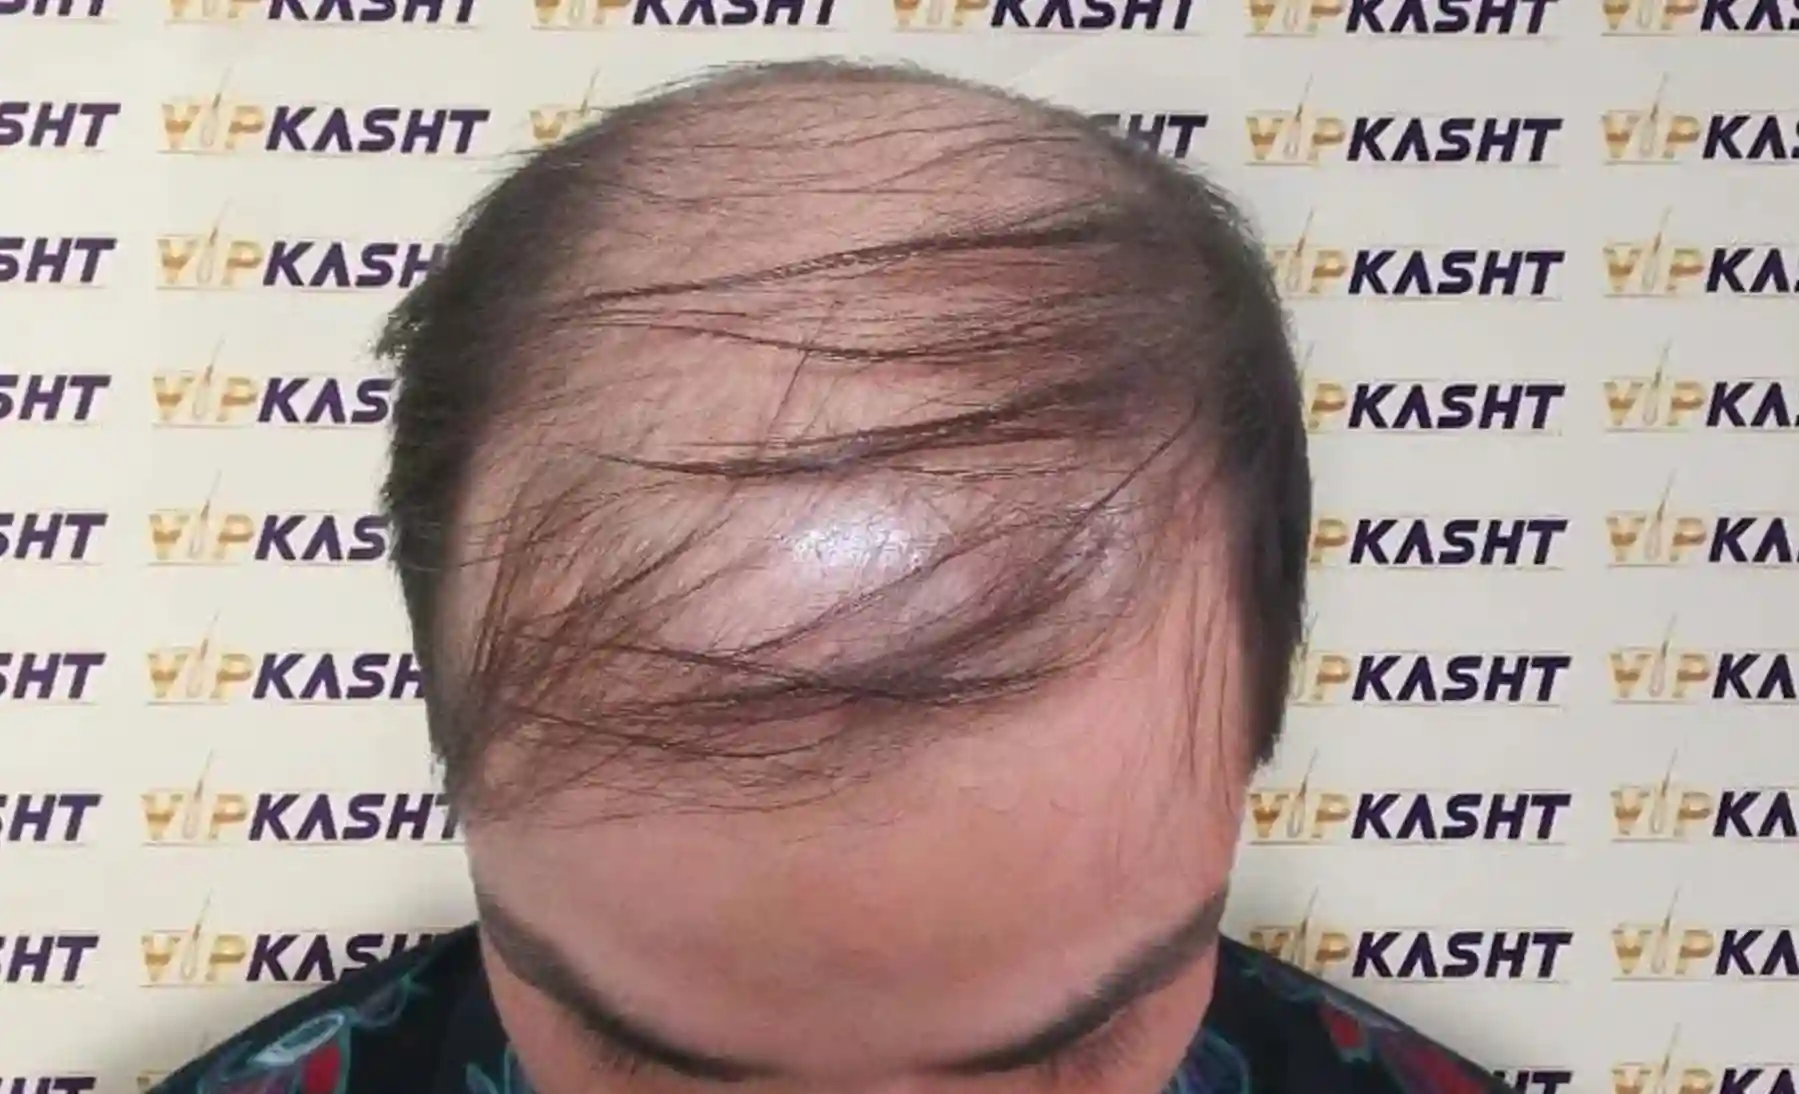 Hair transplants Before and After